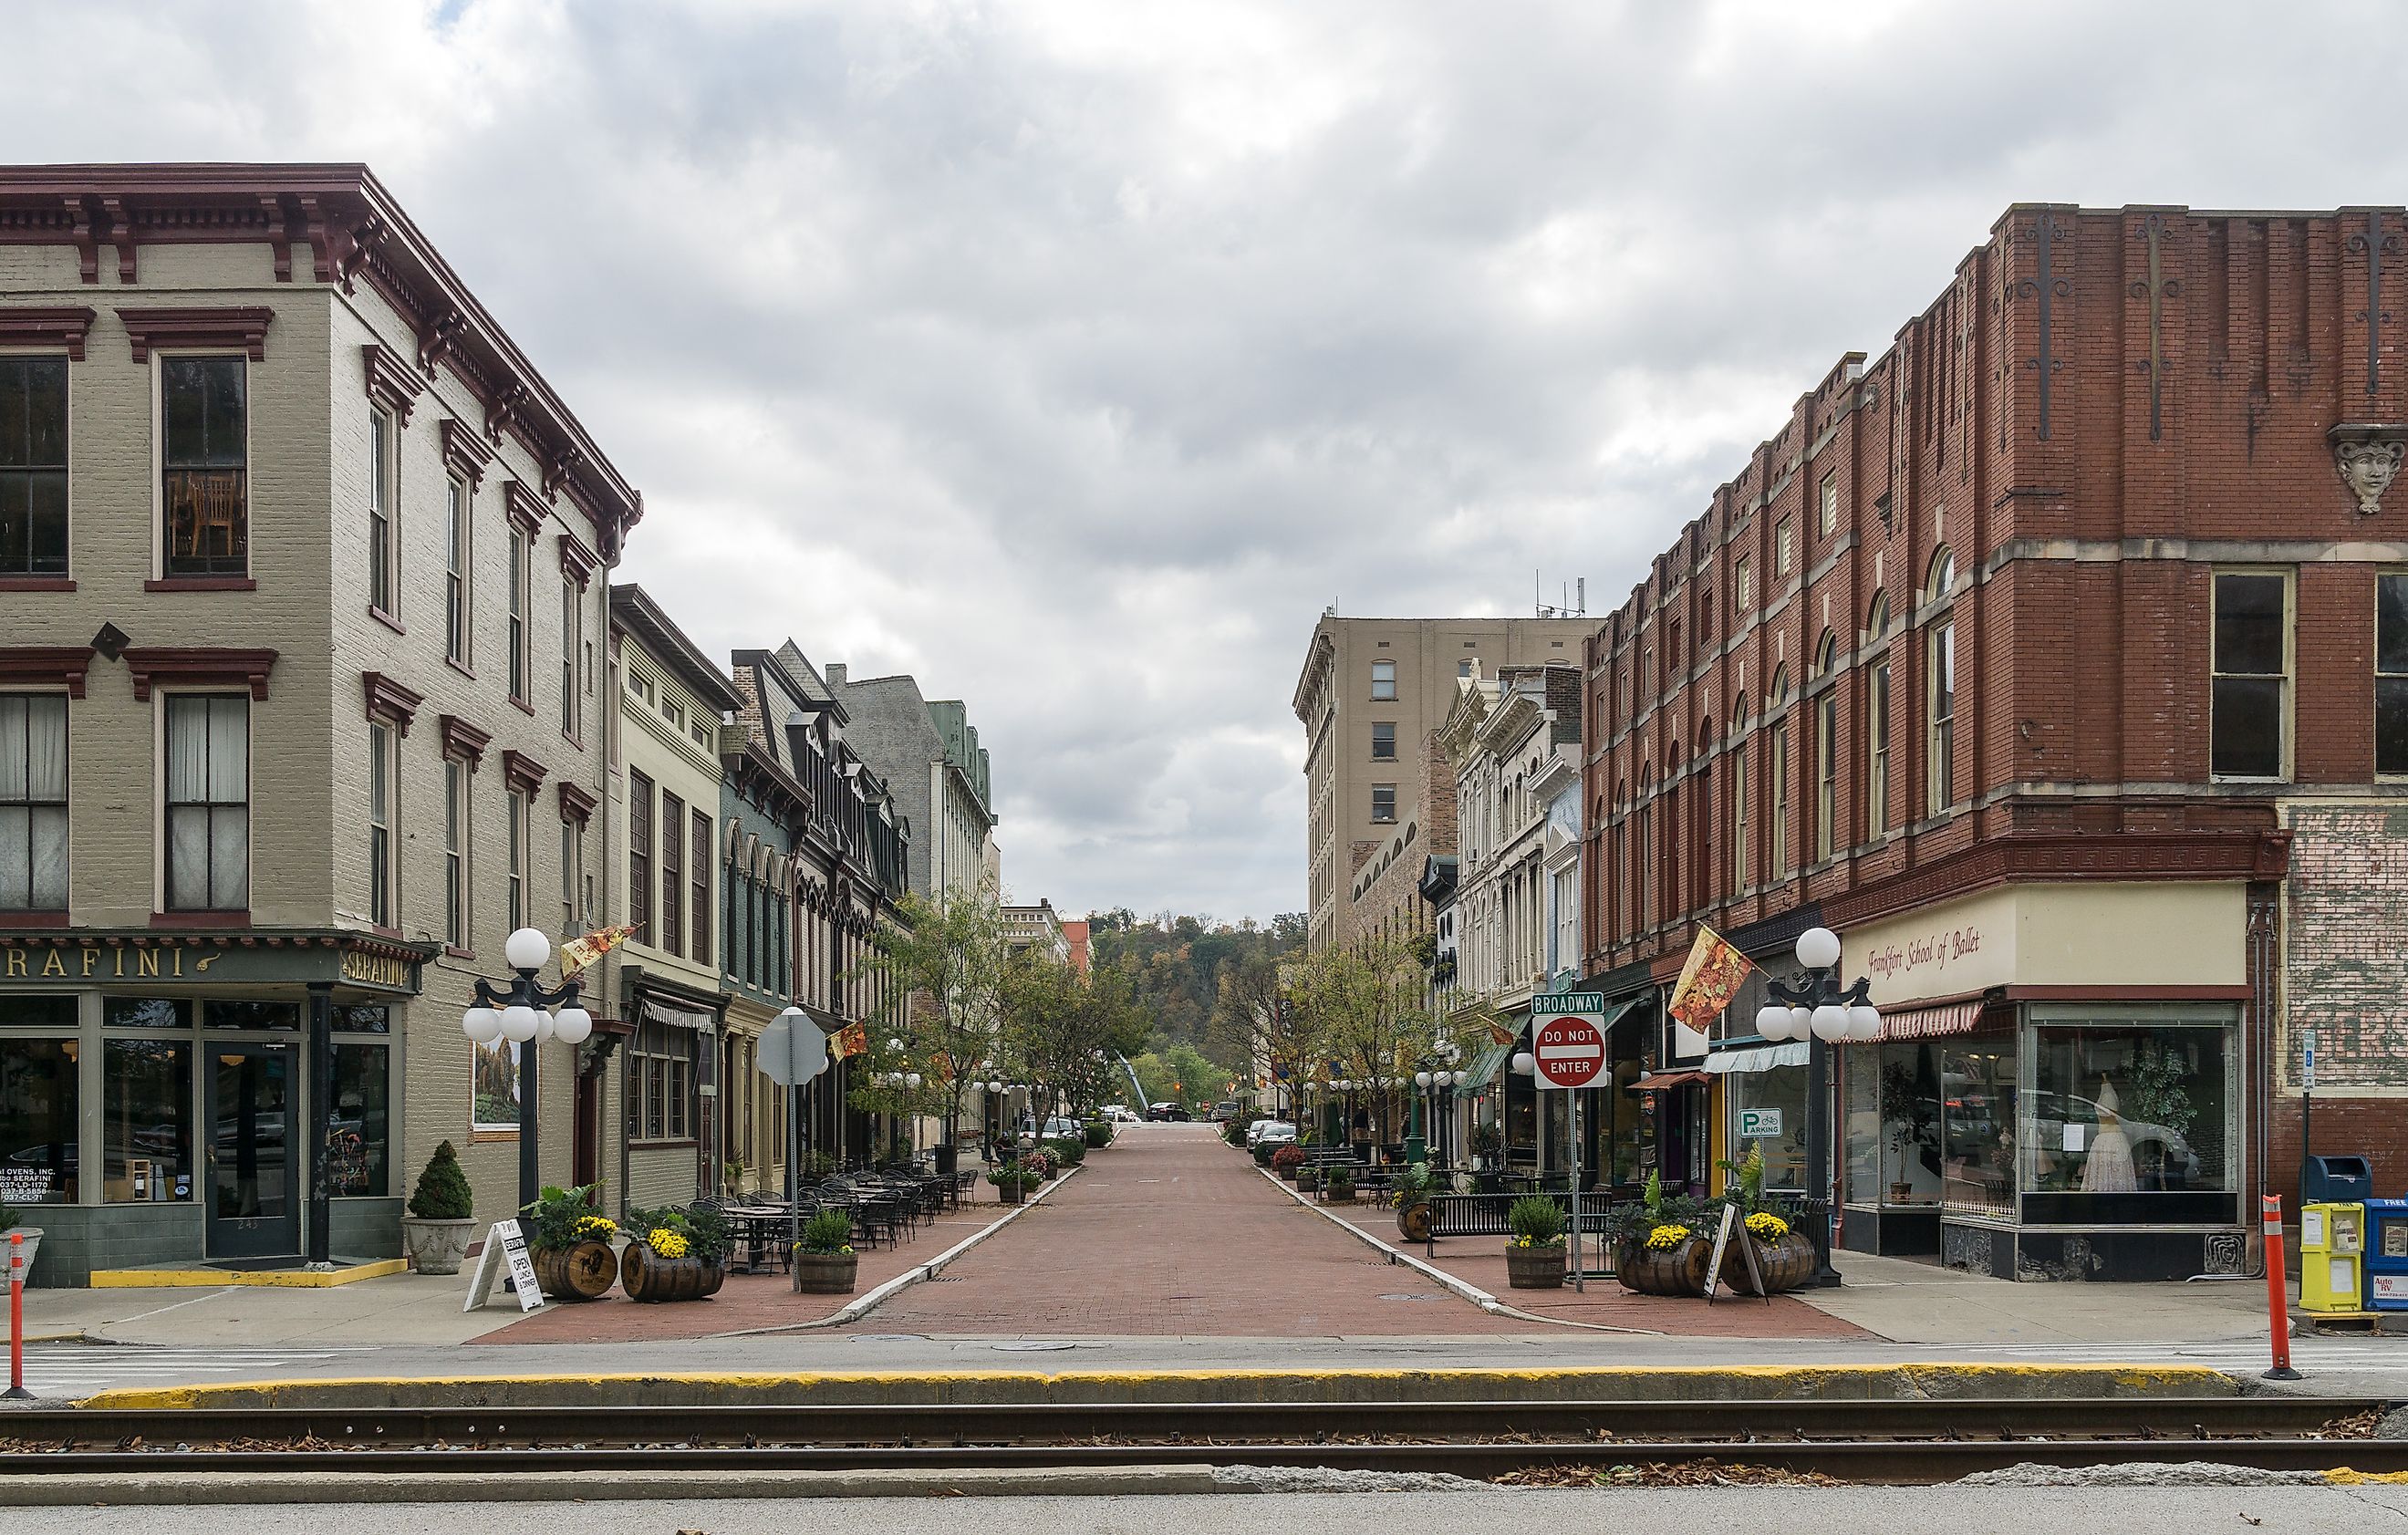 Buildings and businesses lined along St. Clair Street in downtown Frankfort, Kentucky. By Kenneth C. Zirkel - Own work, CC BY-SA 4.0, https://commons.wikimedia.org/w/index.php?curid=57310430.